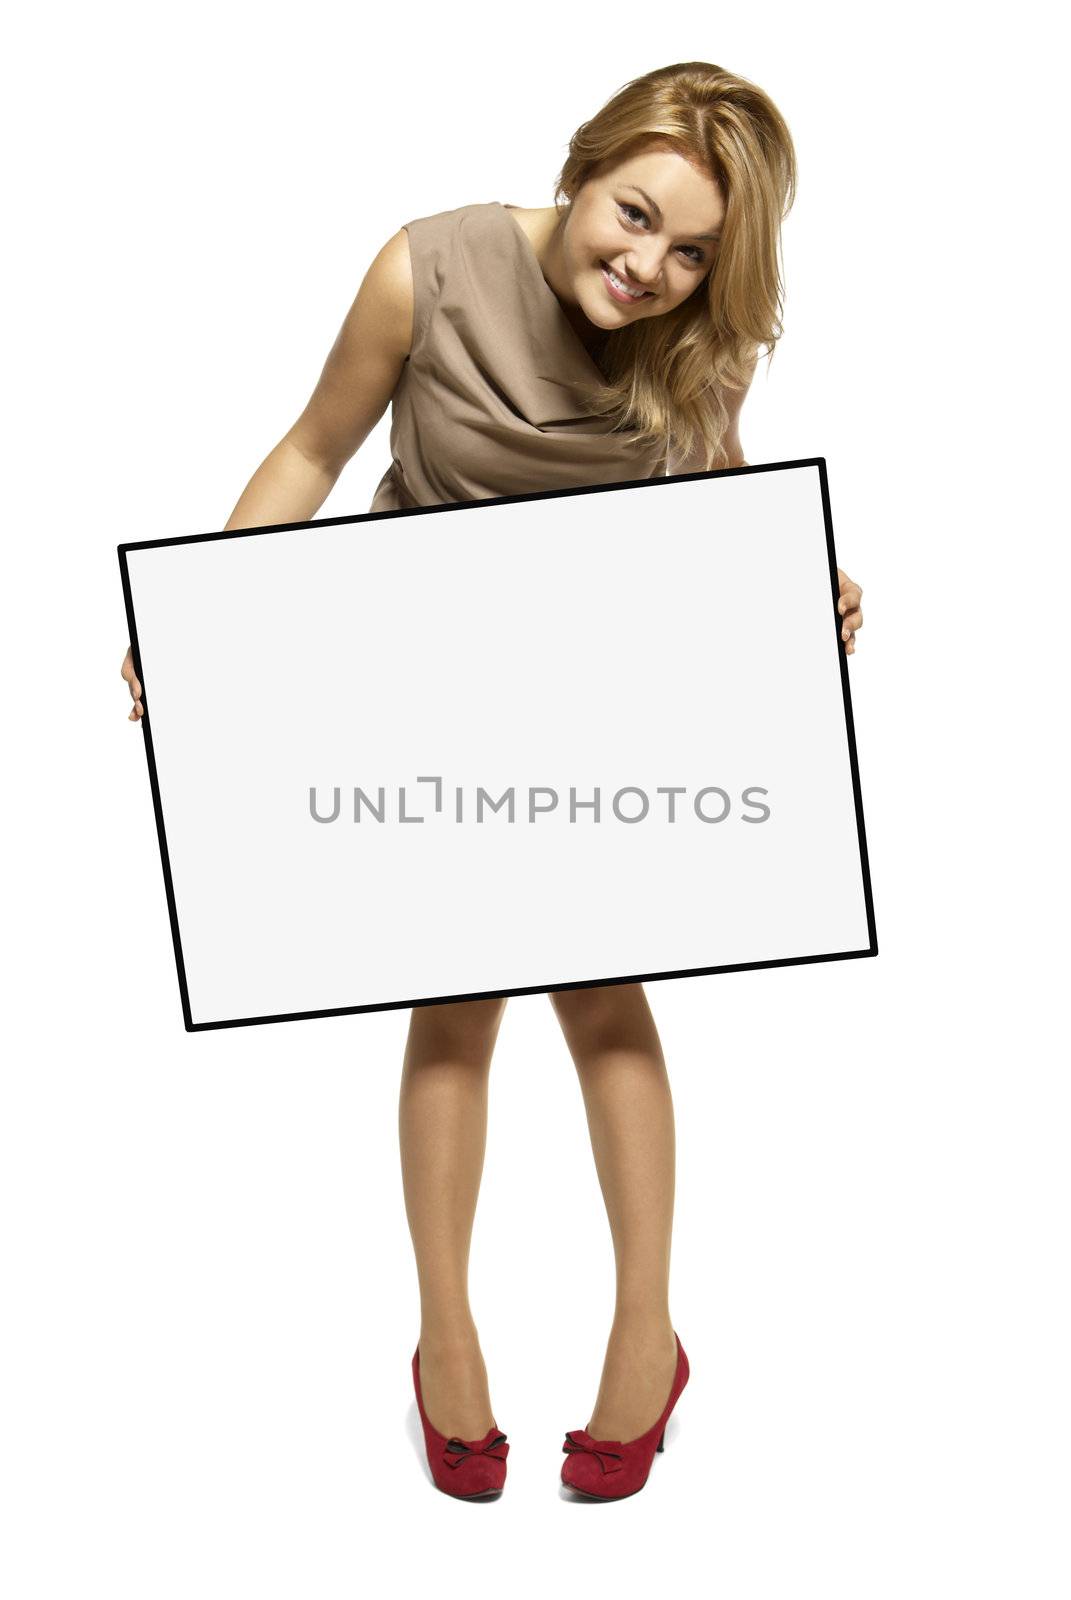 Attractive Woman Holding Up a Blank Sign by filipw